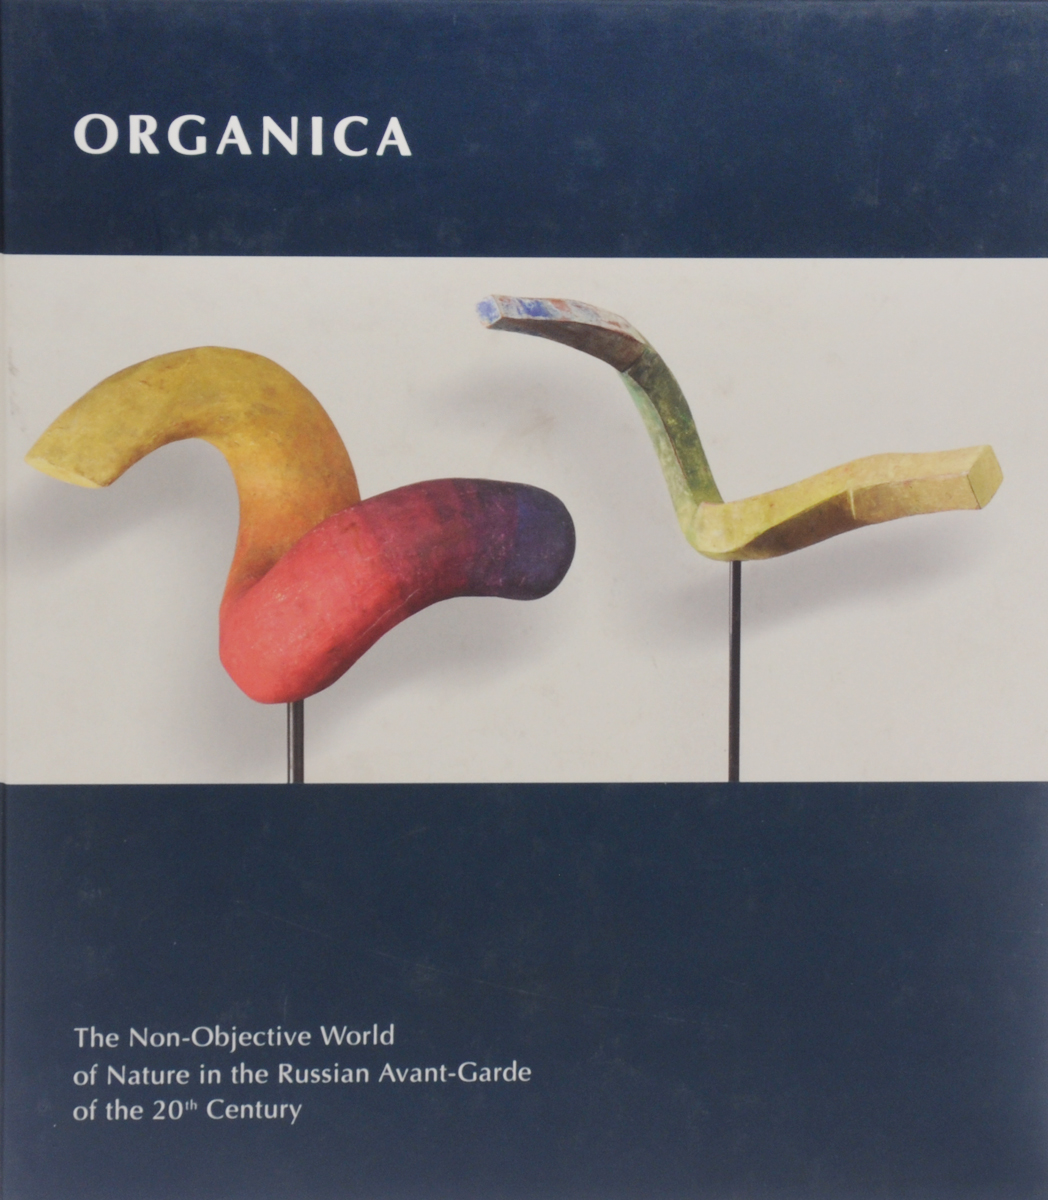 Organic а: Organic: The Non-Objective World of Nature in the Russian Avant-Garde of the 20th Century